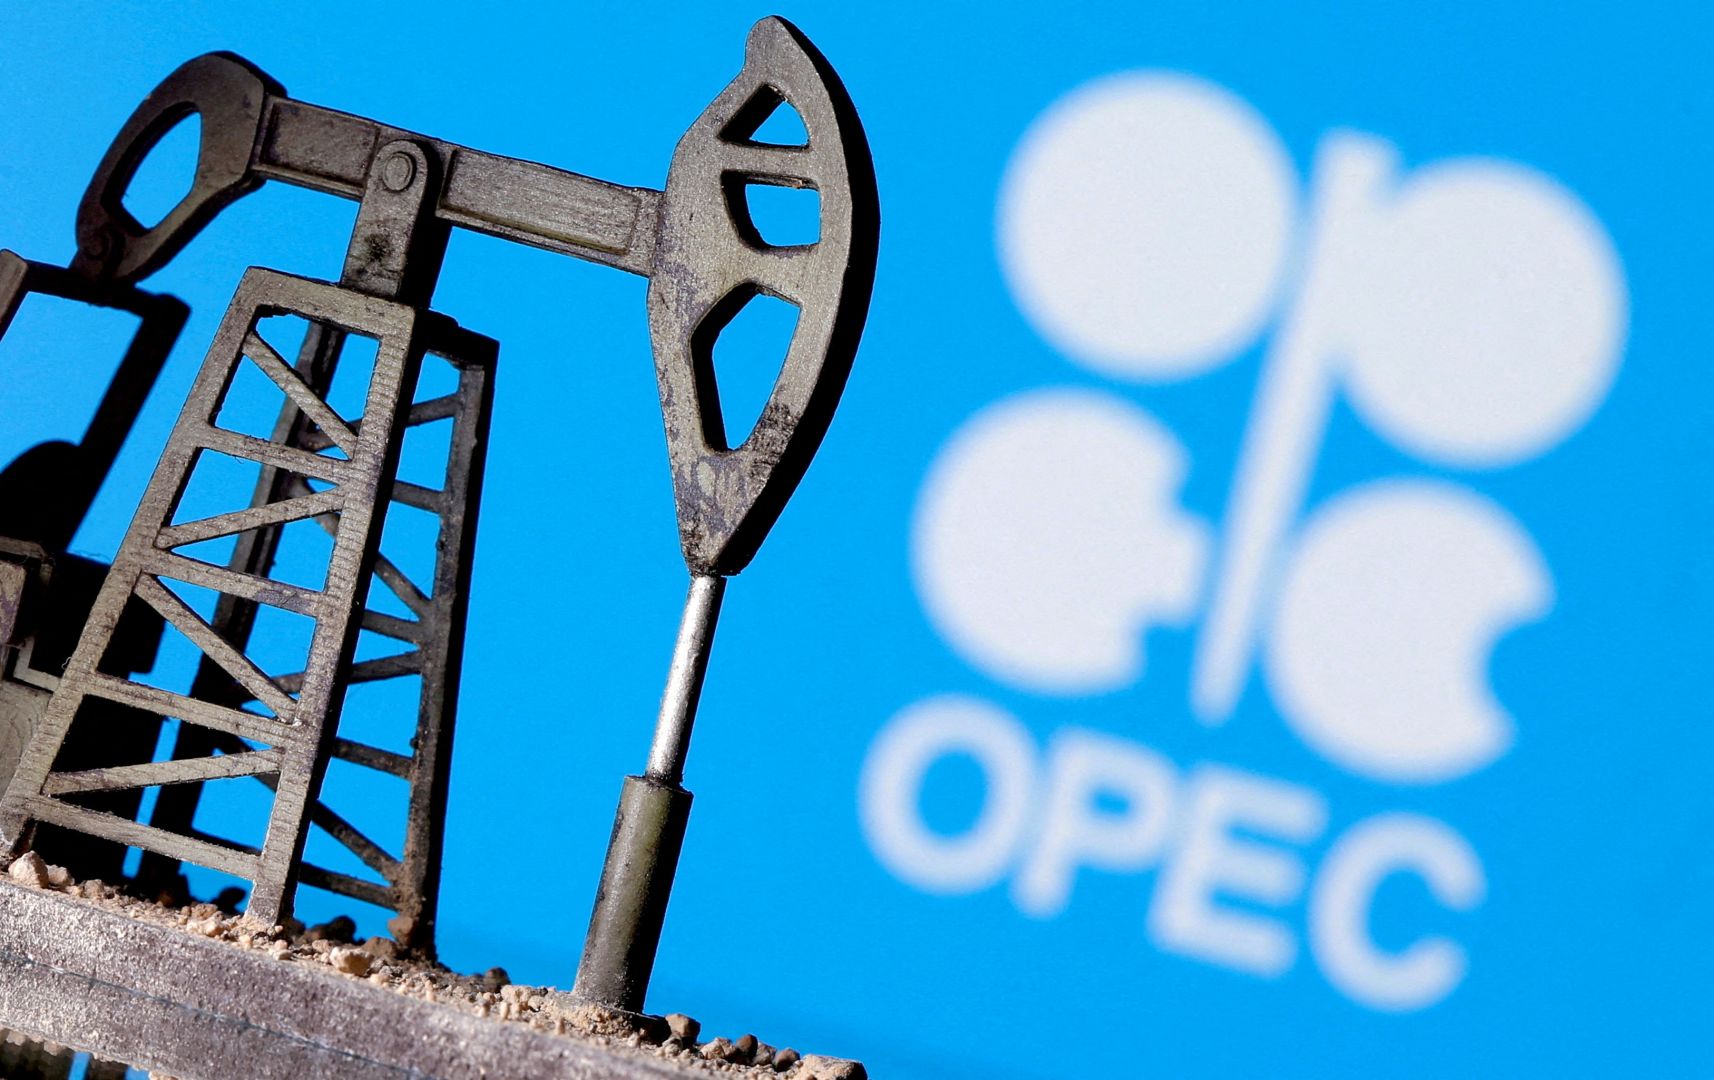 OPEC+ Monitoring Committee plans to hold meeting to discuss oil market